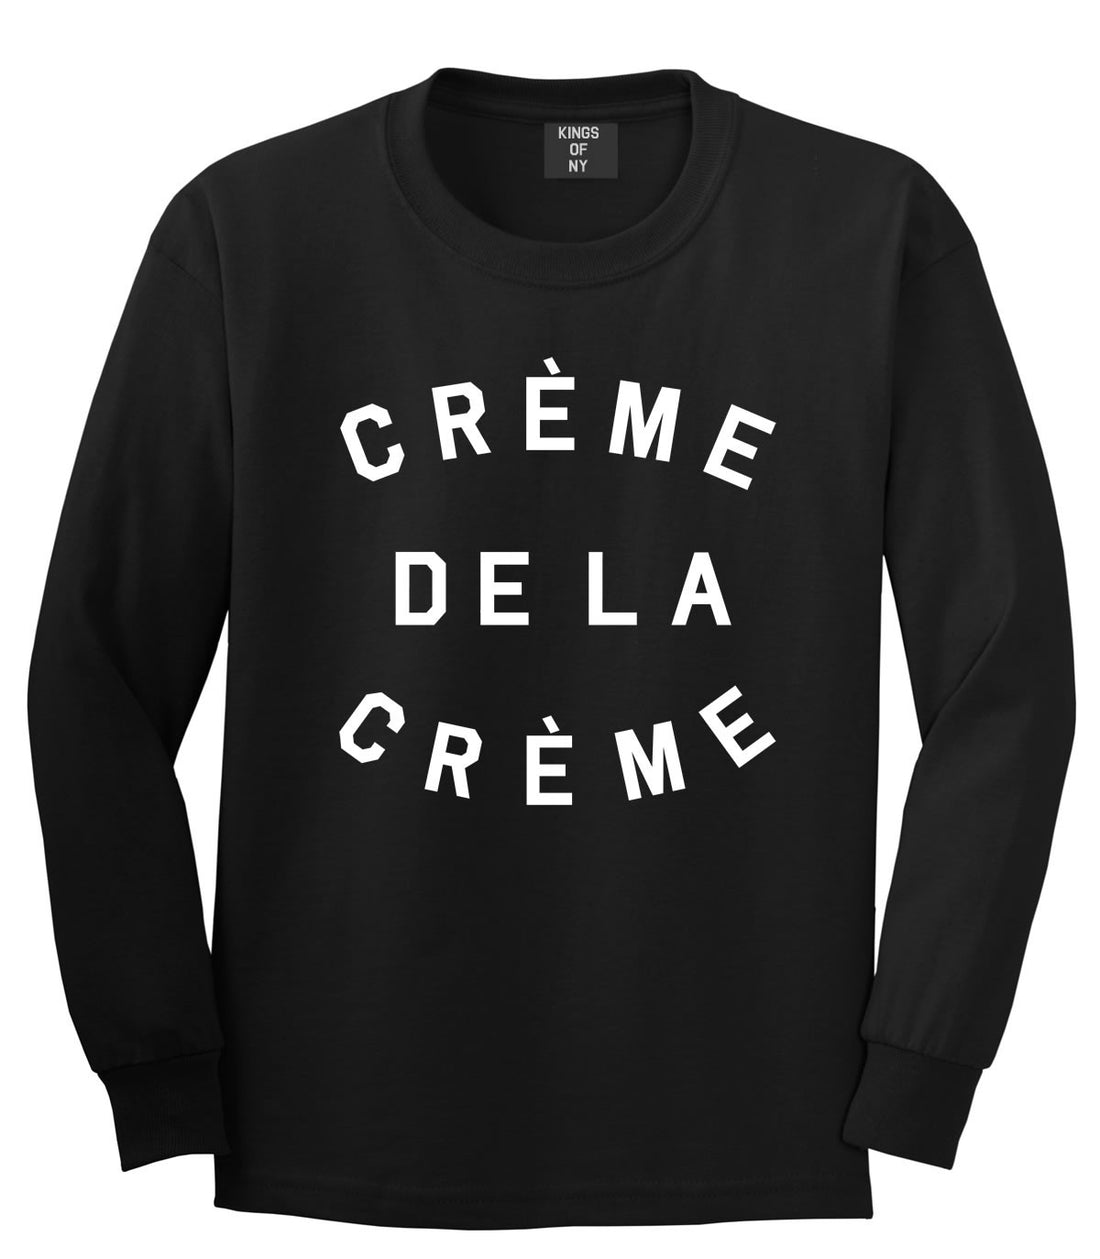 Creme De La Creme Celebrity Fashion Crop Long Sleeve T-Shirt In Black by Kings Of NY